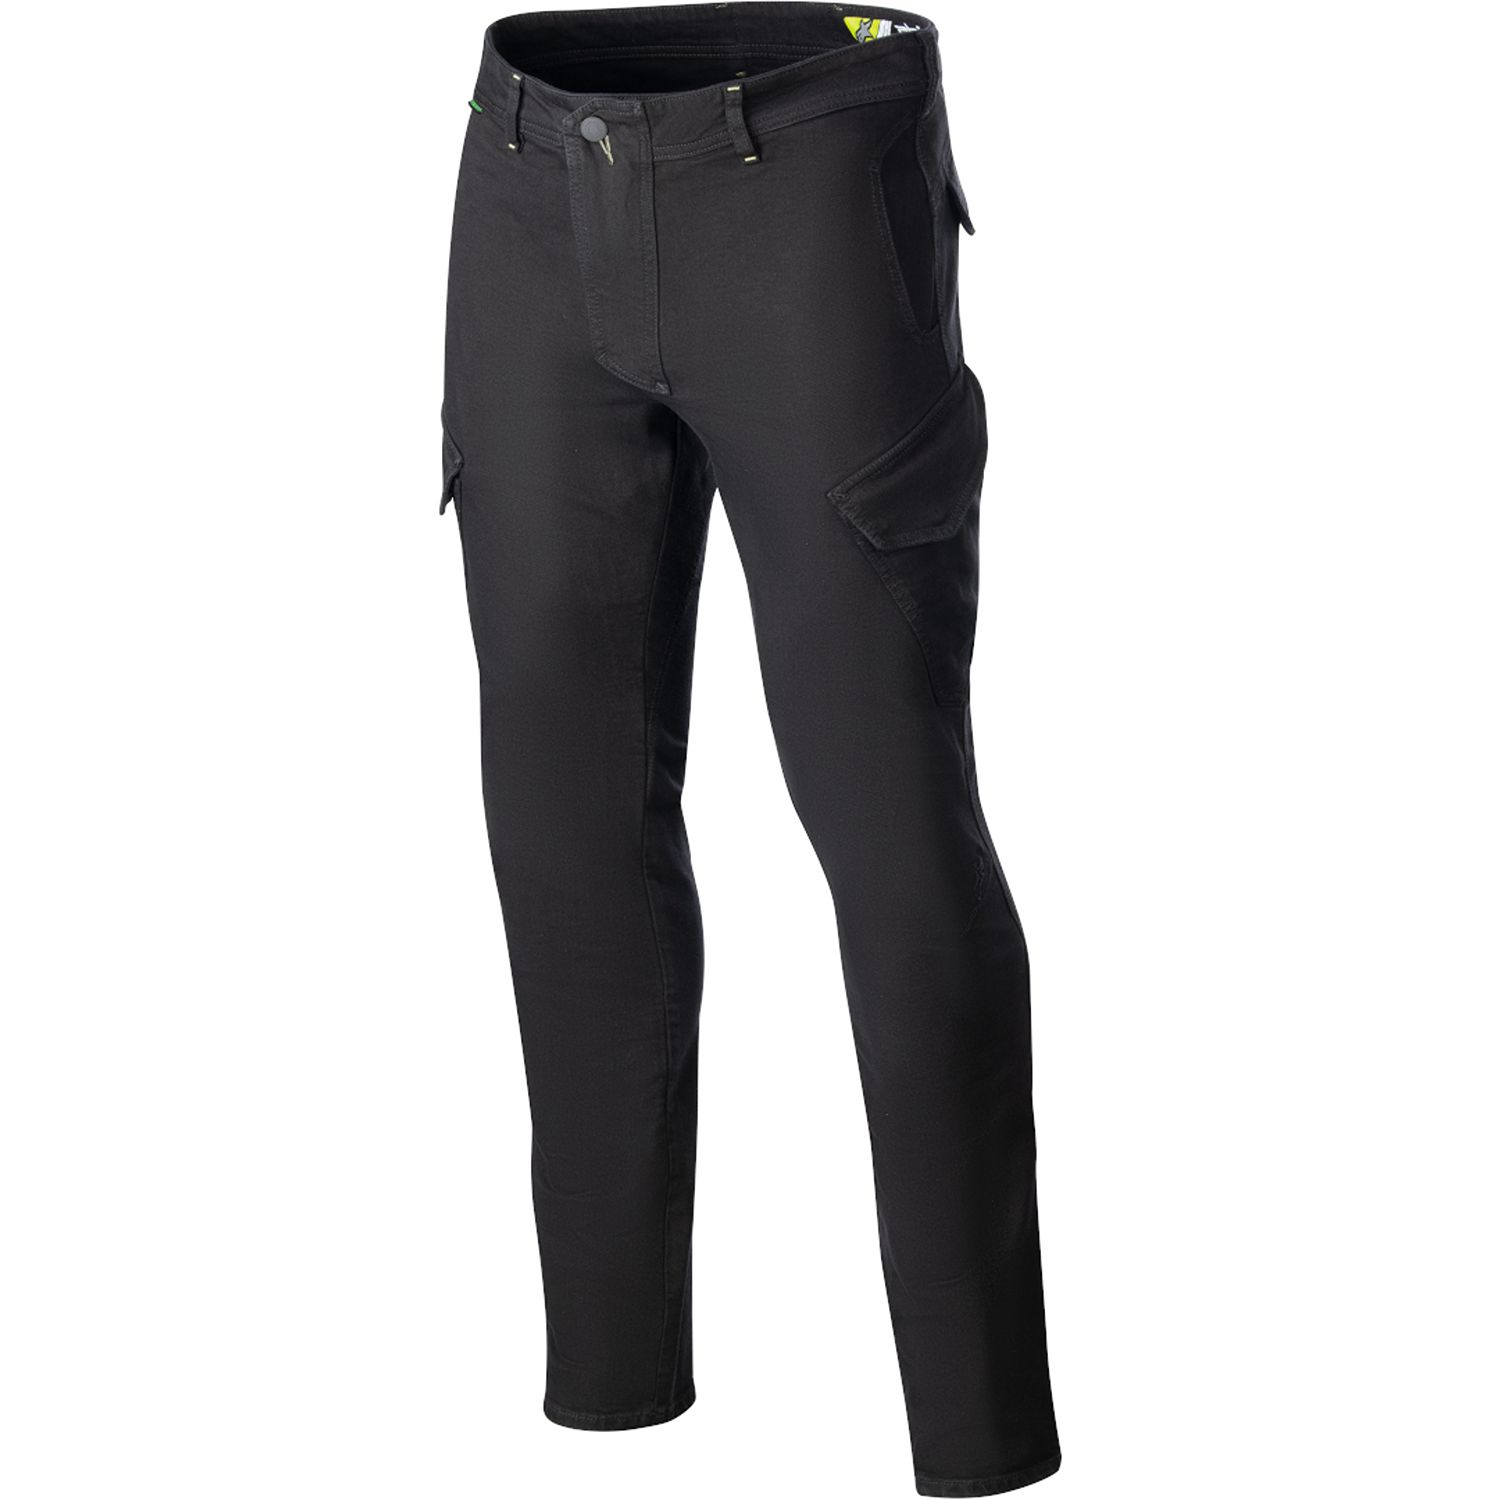 Image of Alpinestars Caliber Slim Fit Tech Riding Pants Anthracite Taille 30